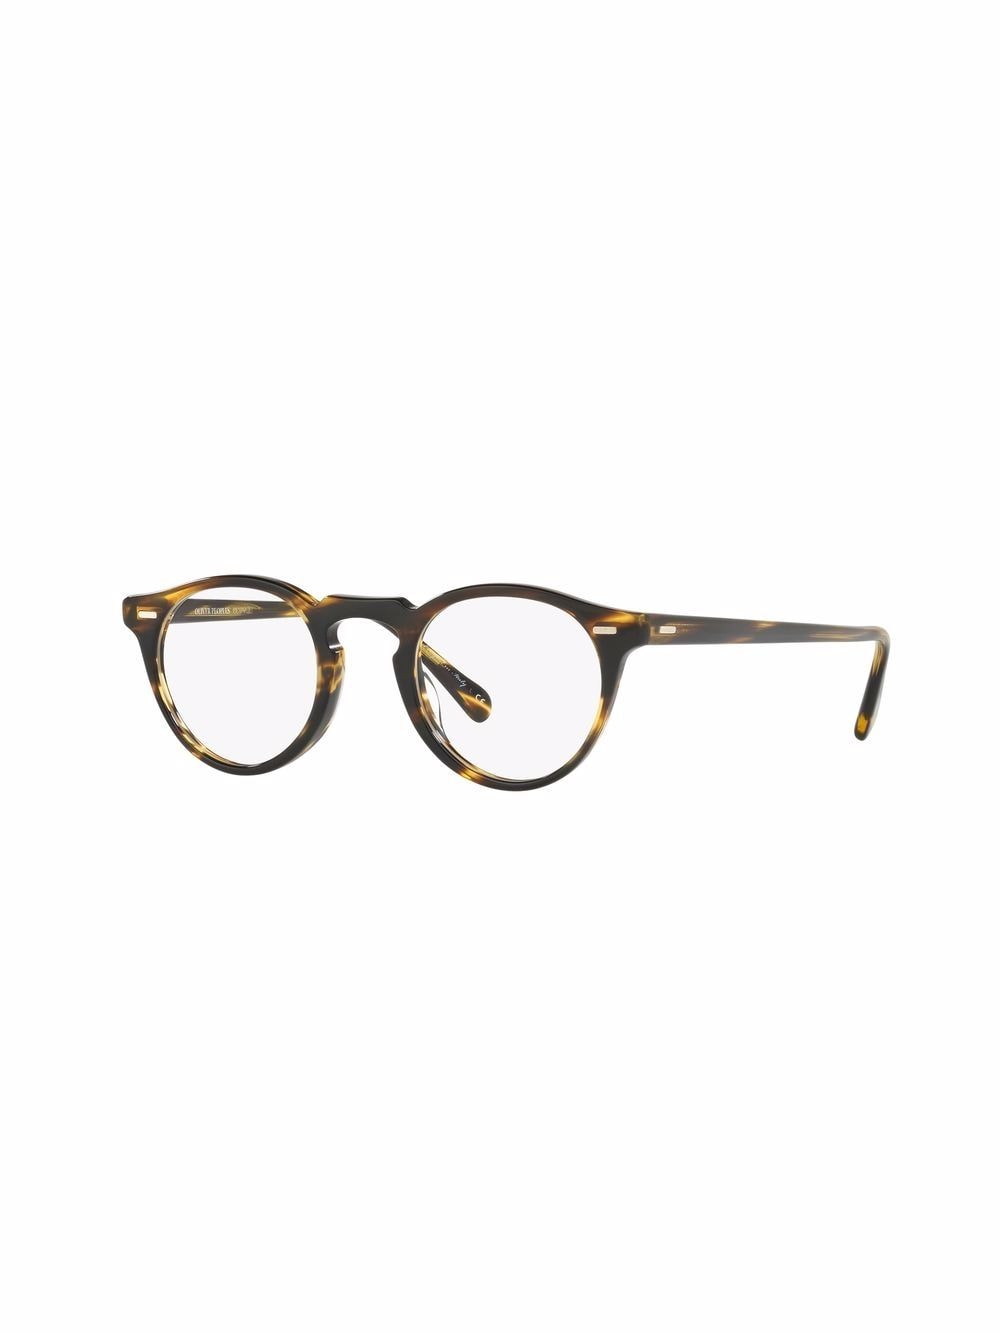 Shop Oliver Peoples Gregory Peck Tortoiseshell Glasses In Brown